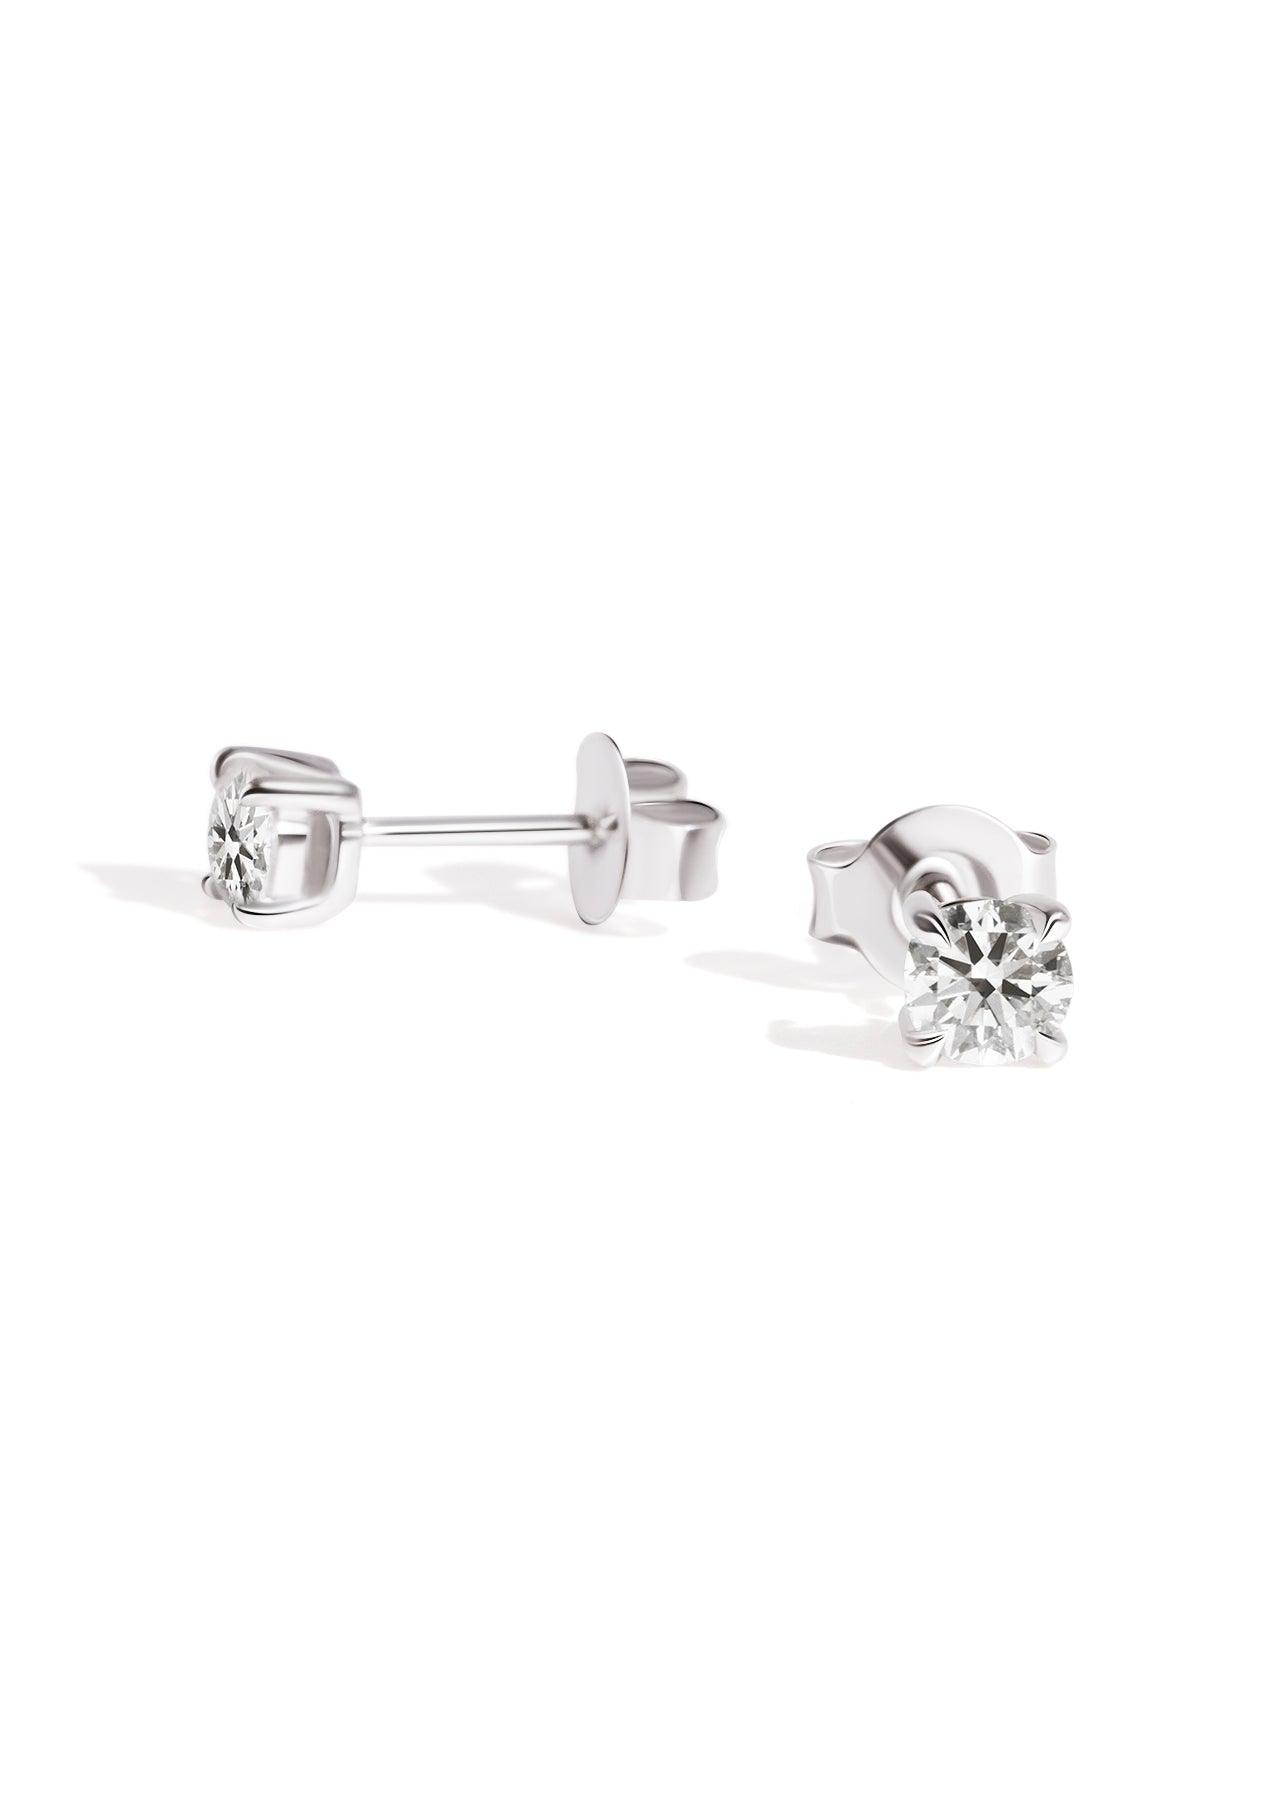 The Poe White Gold Round Cultured Diamond Earrings